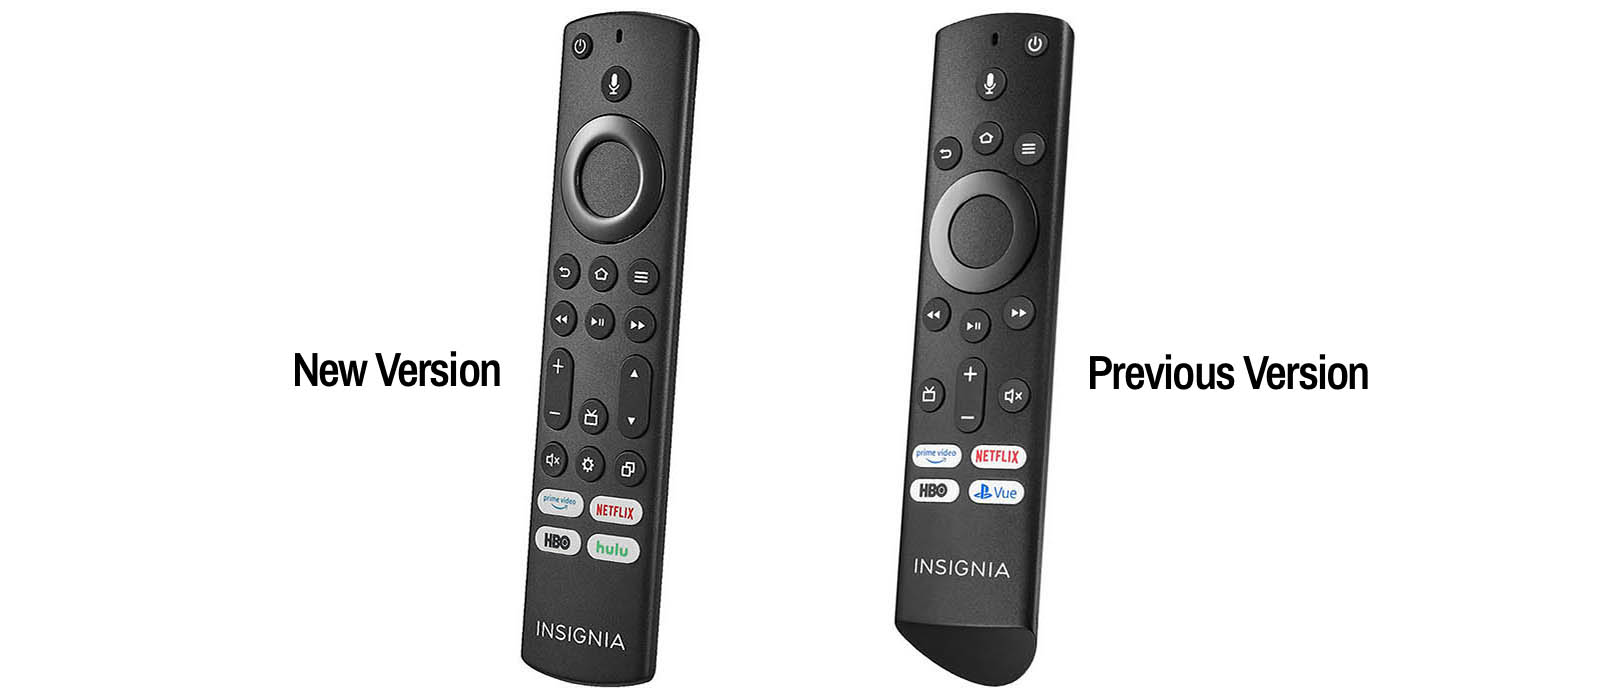 Updated Toshiba Insignia Fire Tv Remotes Boast More Controls Still Works With Older Models Cord Cutters News